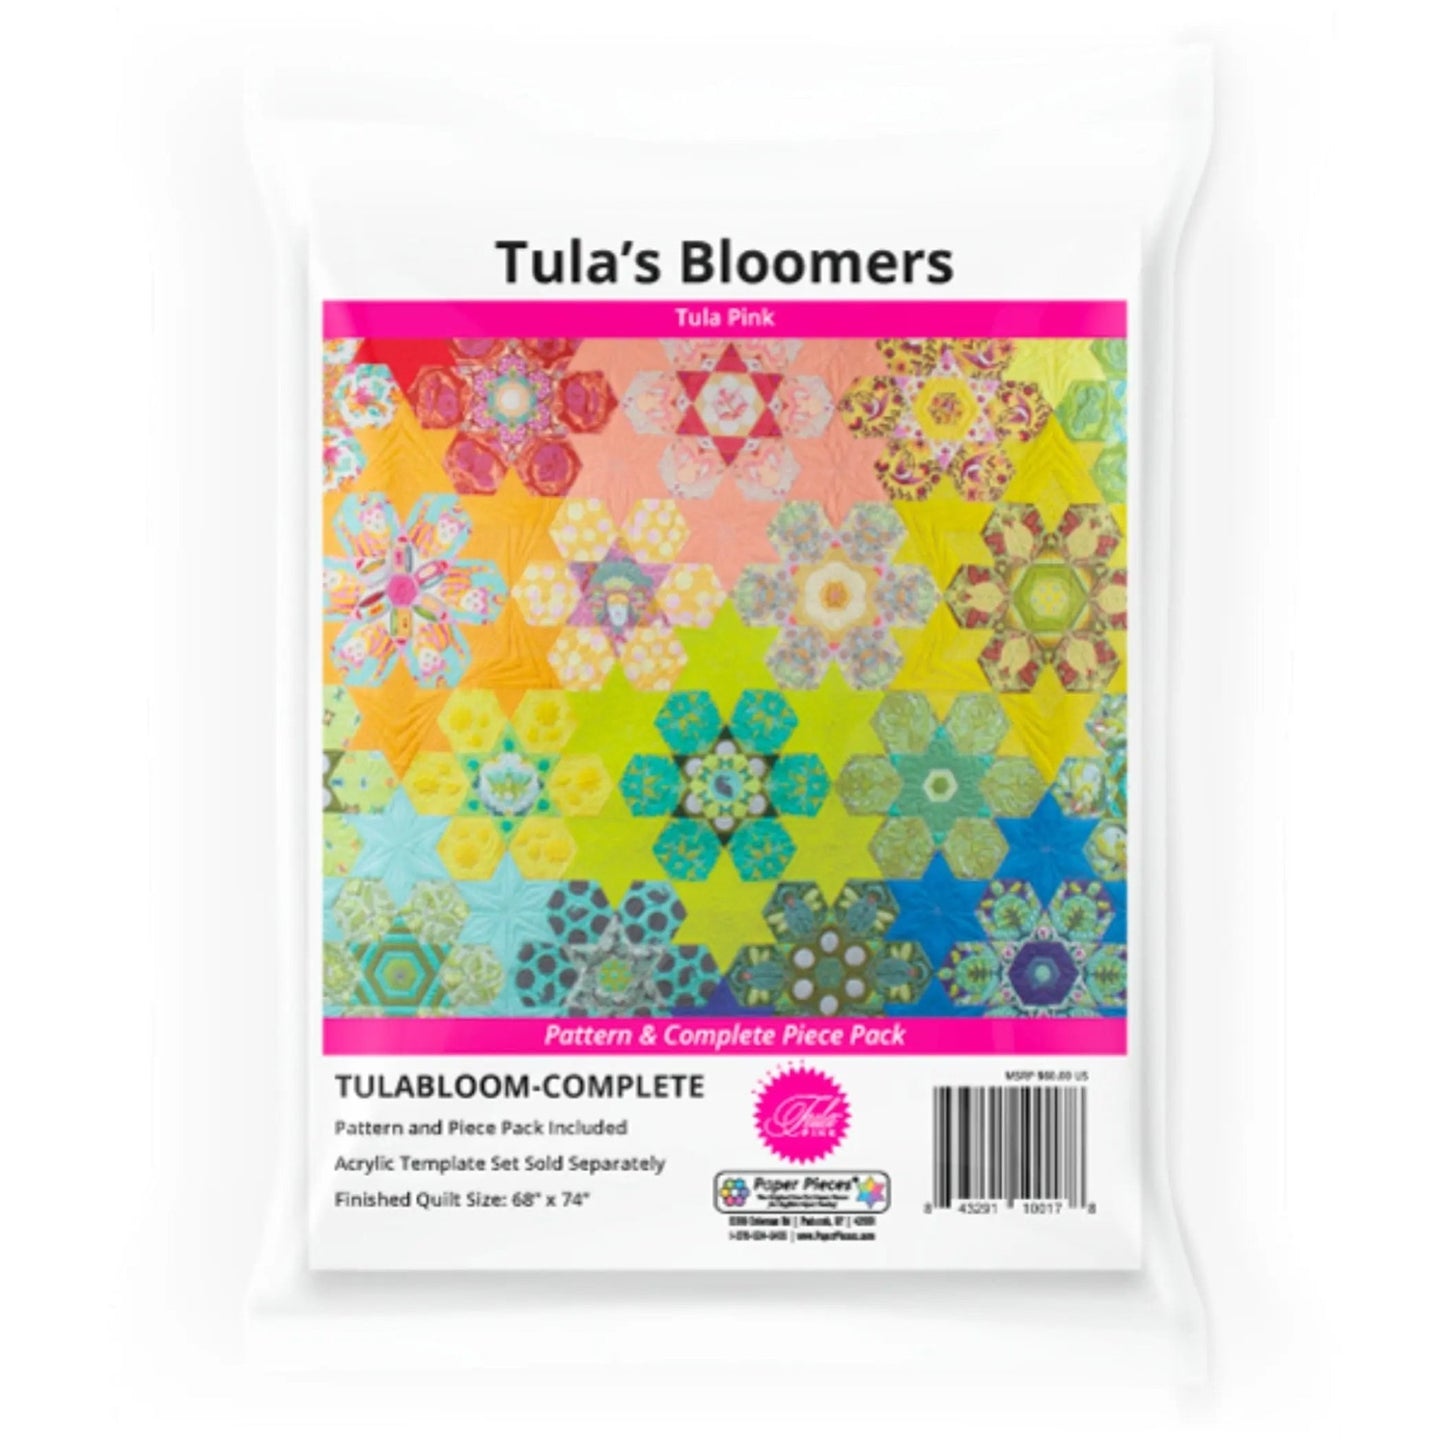 Tula's Bloomers by Tula Pink - Jammin Threads